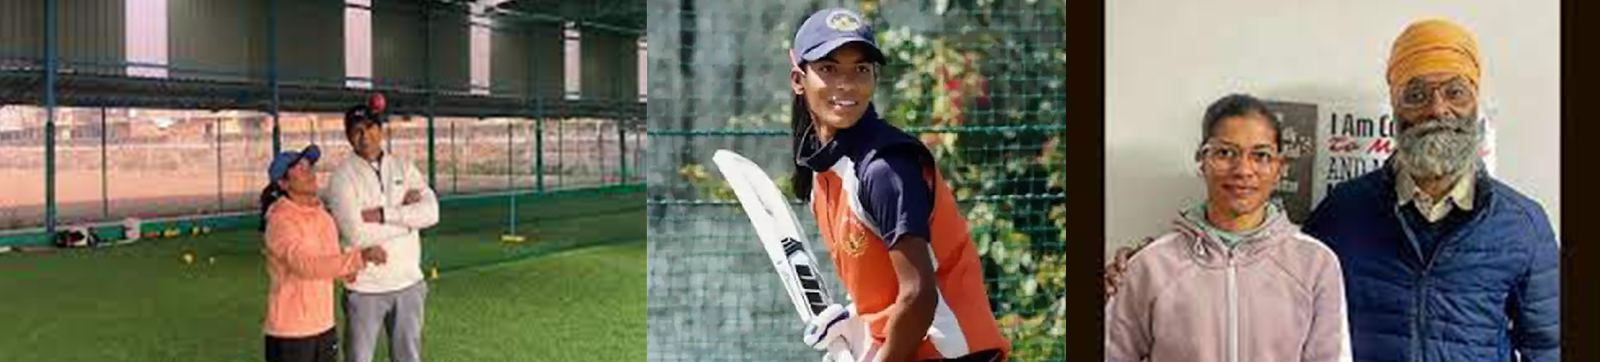 Mohali’s Amanjot, Ex-Chandigarh Women’s Cricket Captain, to Play in South Africa Tri-Series